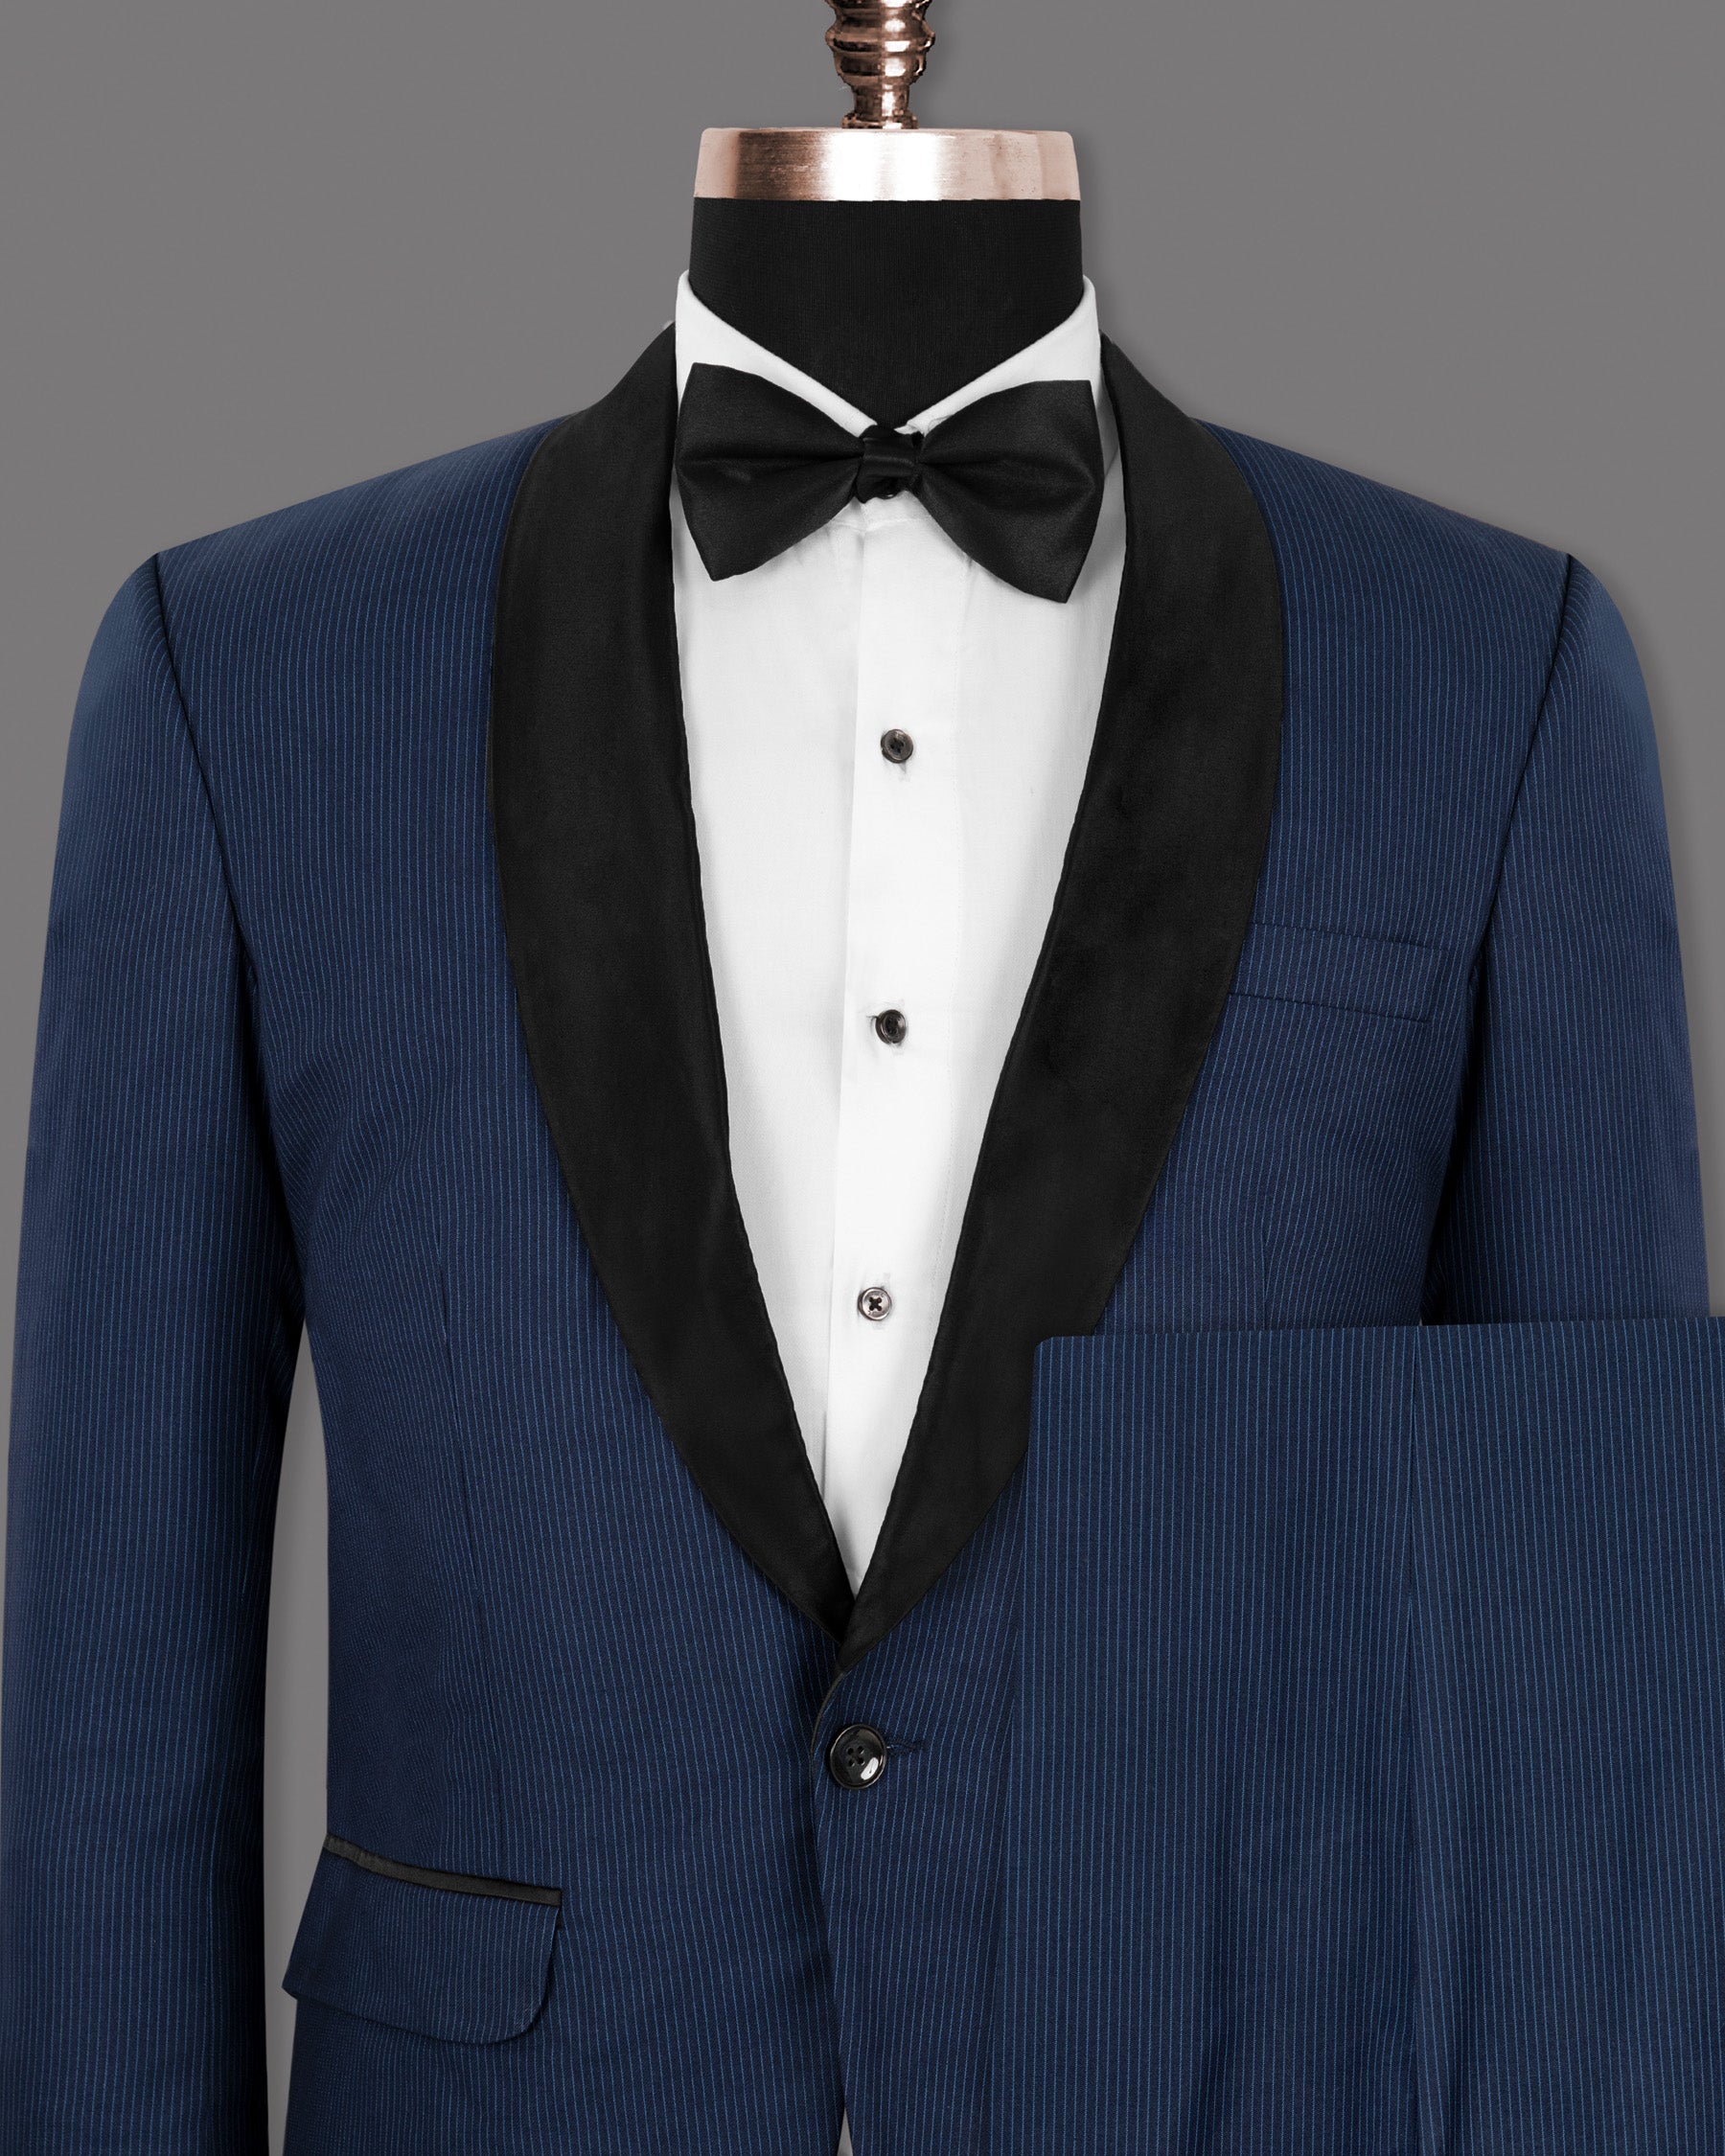 Midnight and Chambray STue Striped Woolrich Tuxedo Suit ST1272-BKL-36, ST1272-BKL-38, ST1272-BKL-40, ST1272-BKL-42, ST1272-BKL-44, ST1272-BKL-46, ST1272-BKL-48, ST1272-BKL-50, ST1272-BKL-52, ST1272-BKL-54, ST1272-BKL-56, ST1272-BKL-58, ST1272-BKL-60